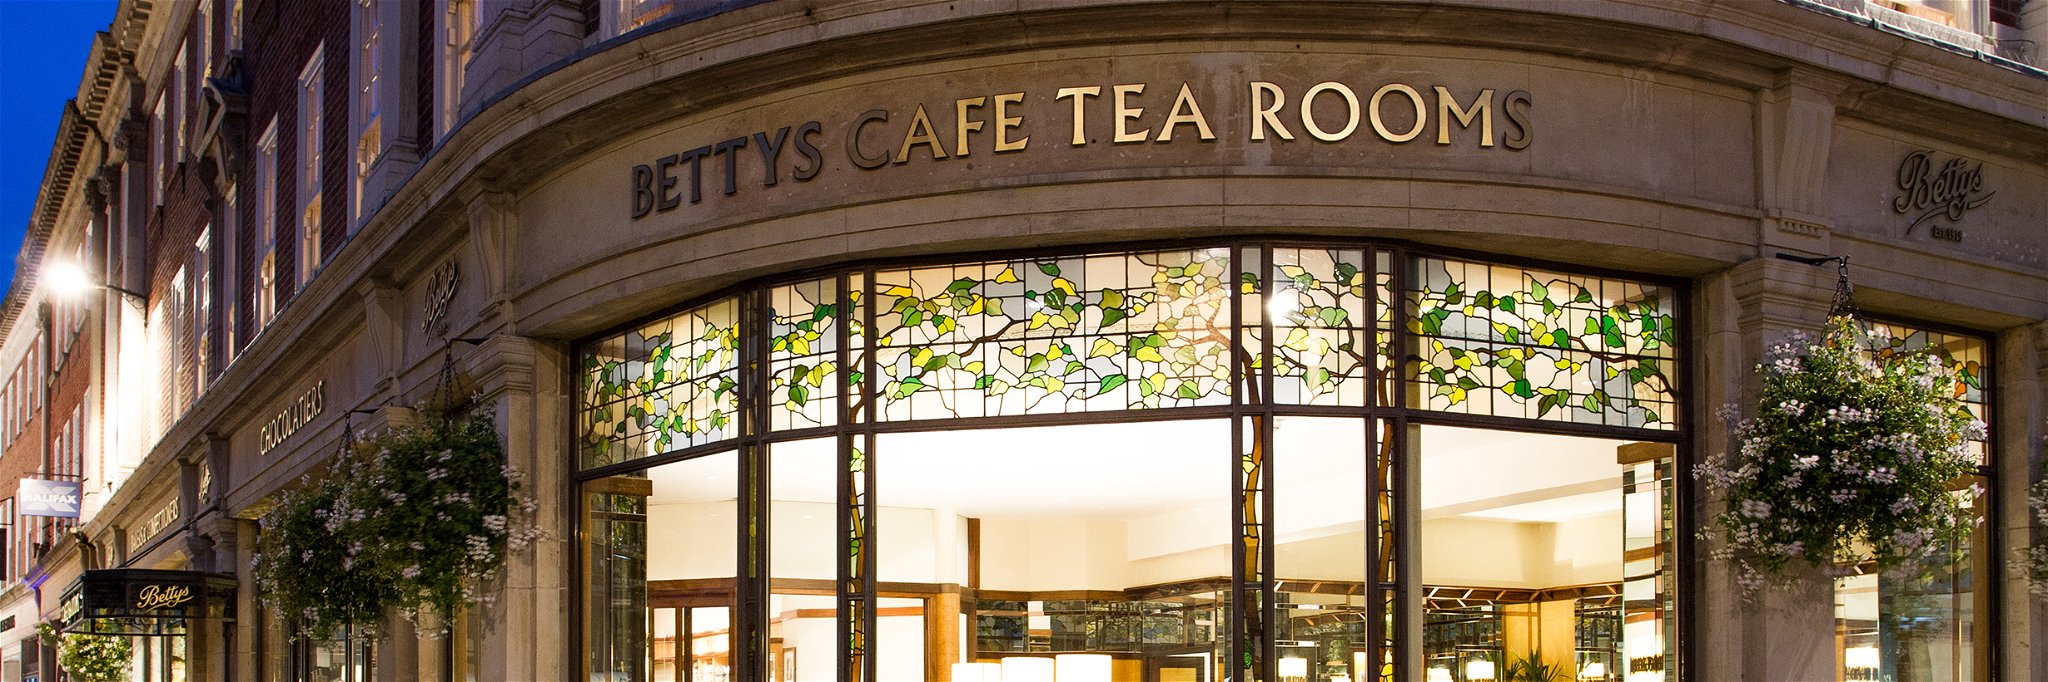 Betty's Cafe and Tea Rooms in York, UK